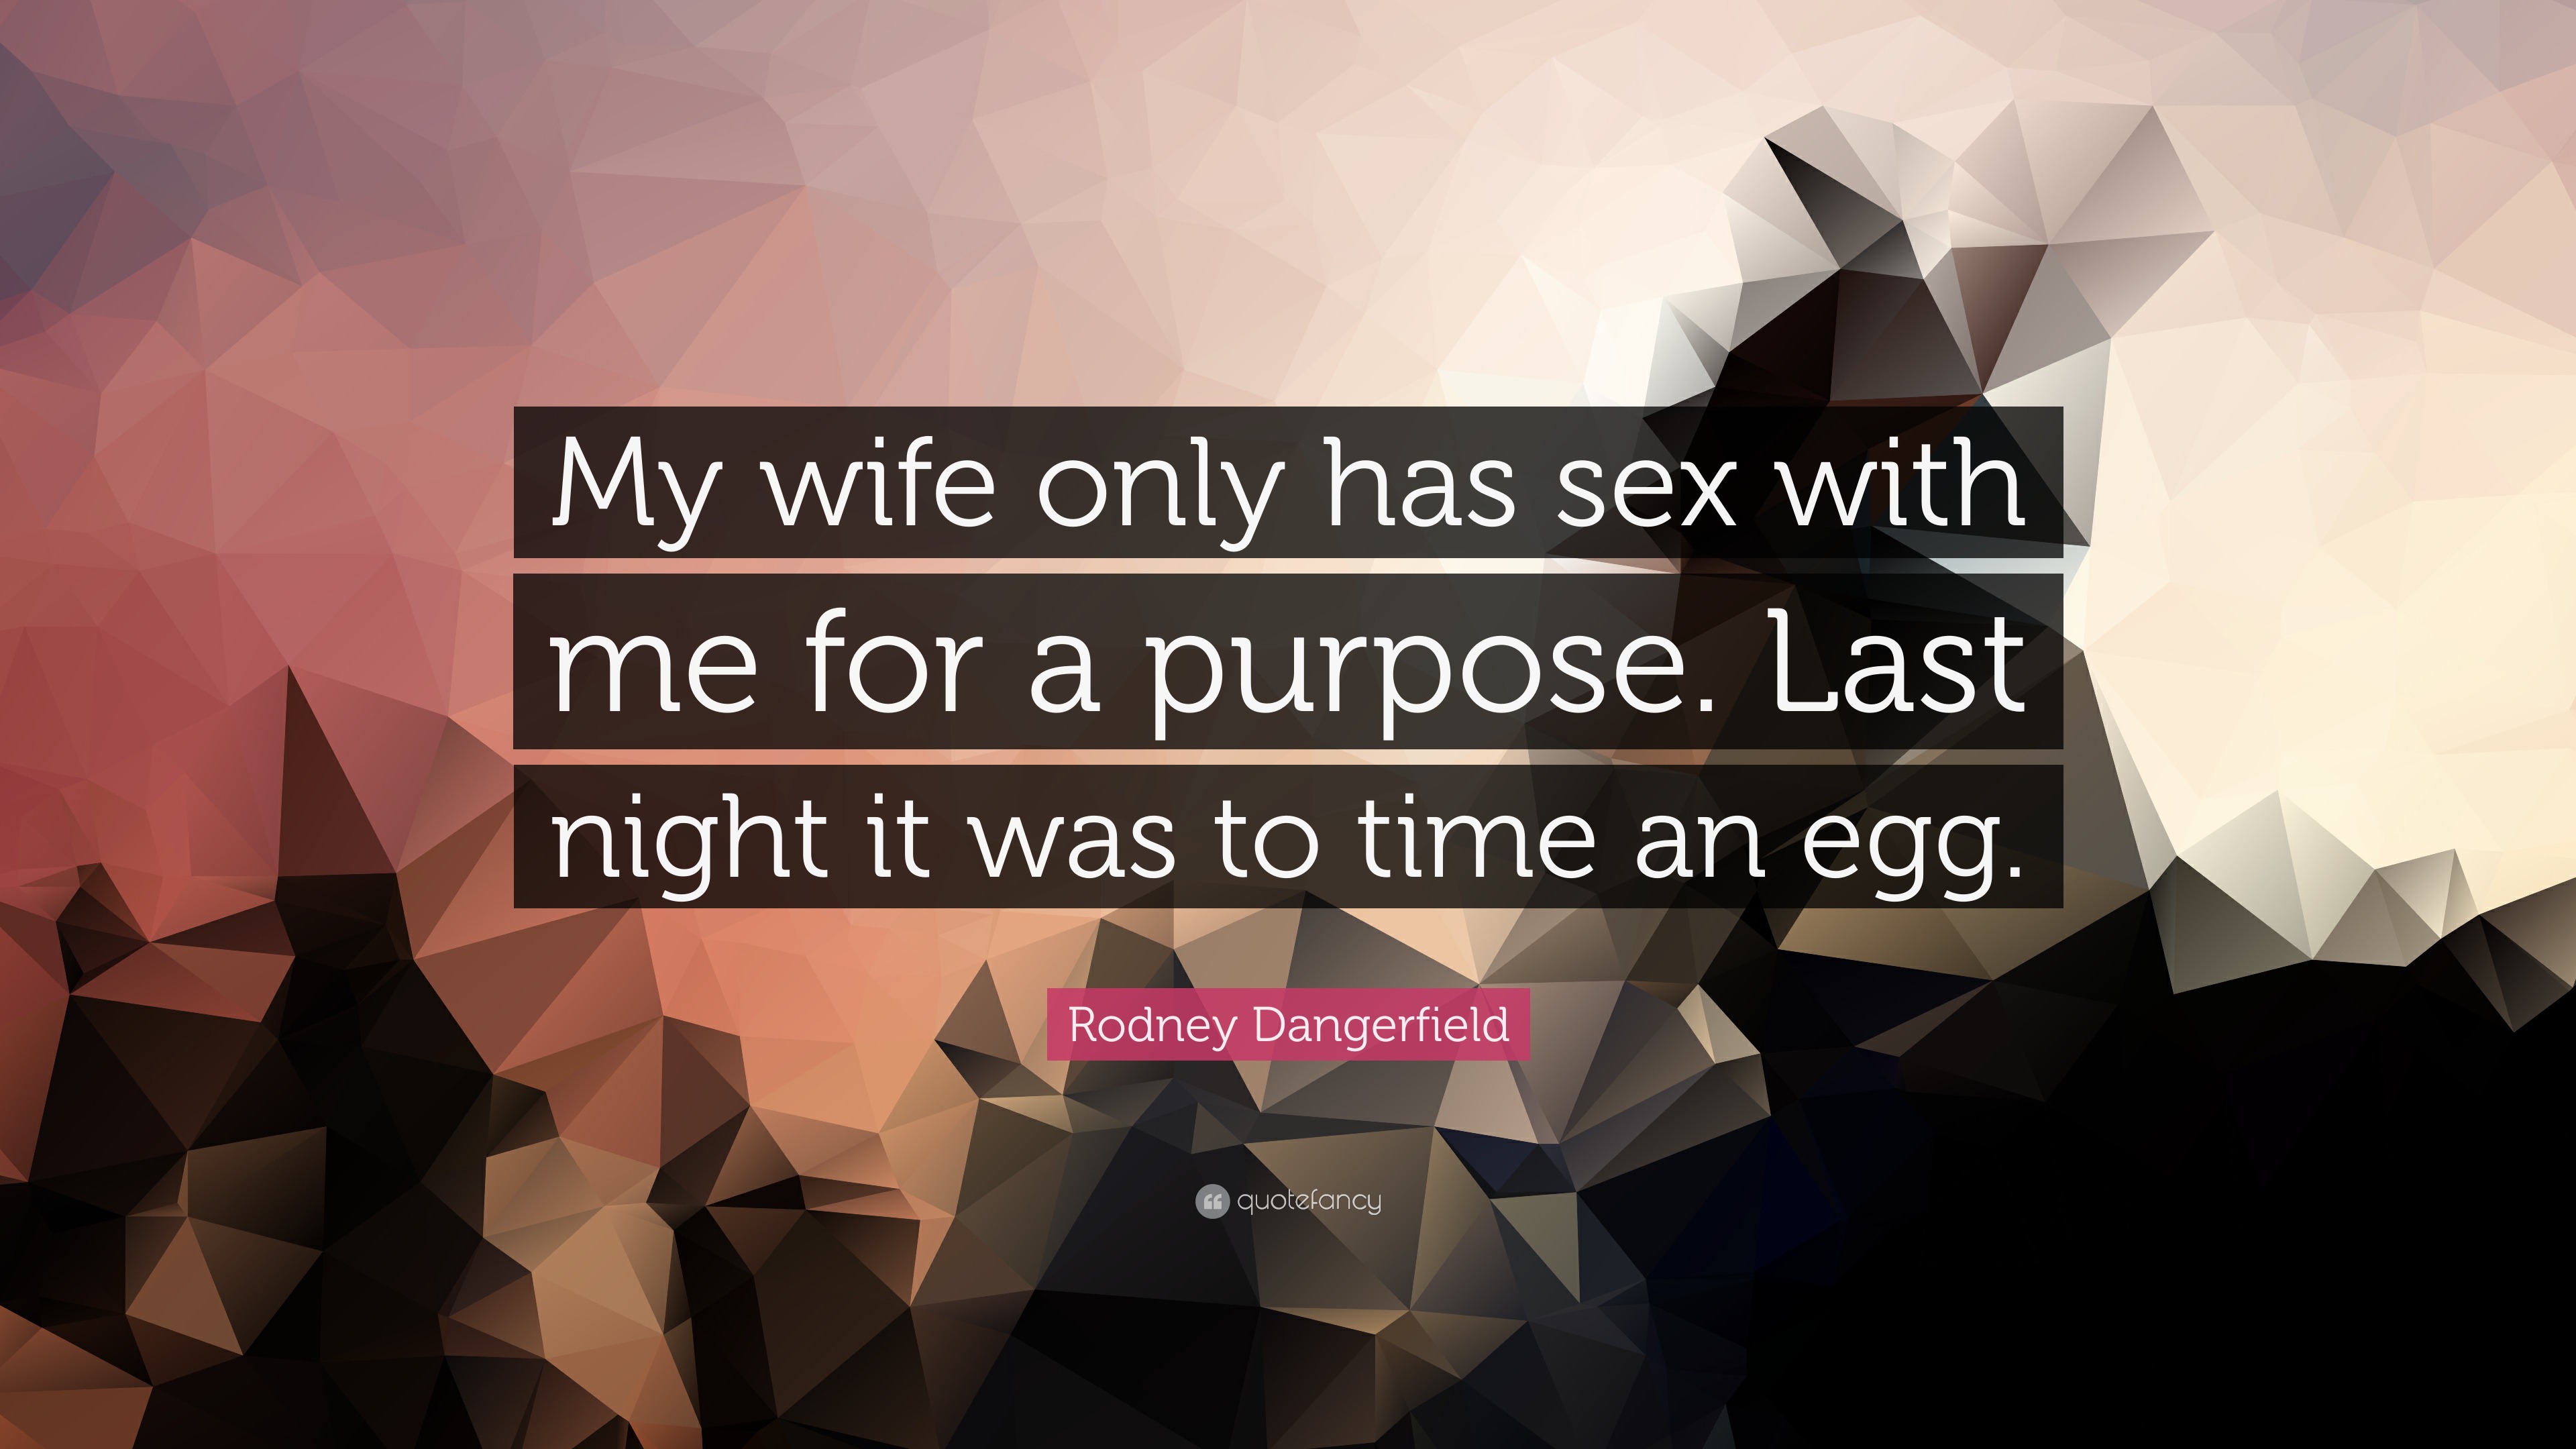 Rodney Dangerfield Quote “My wife only has sex with me for a purpose